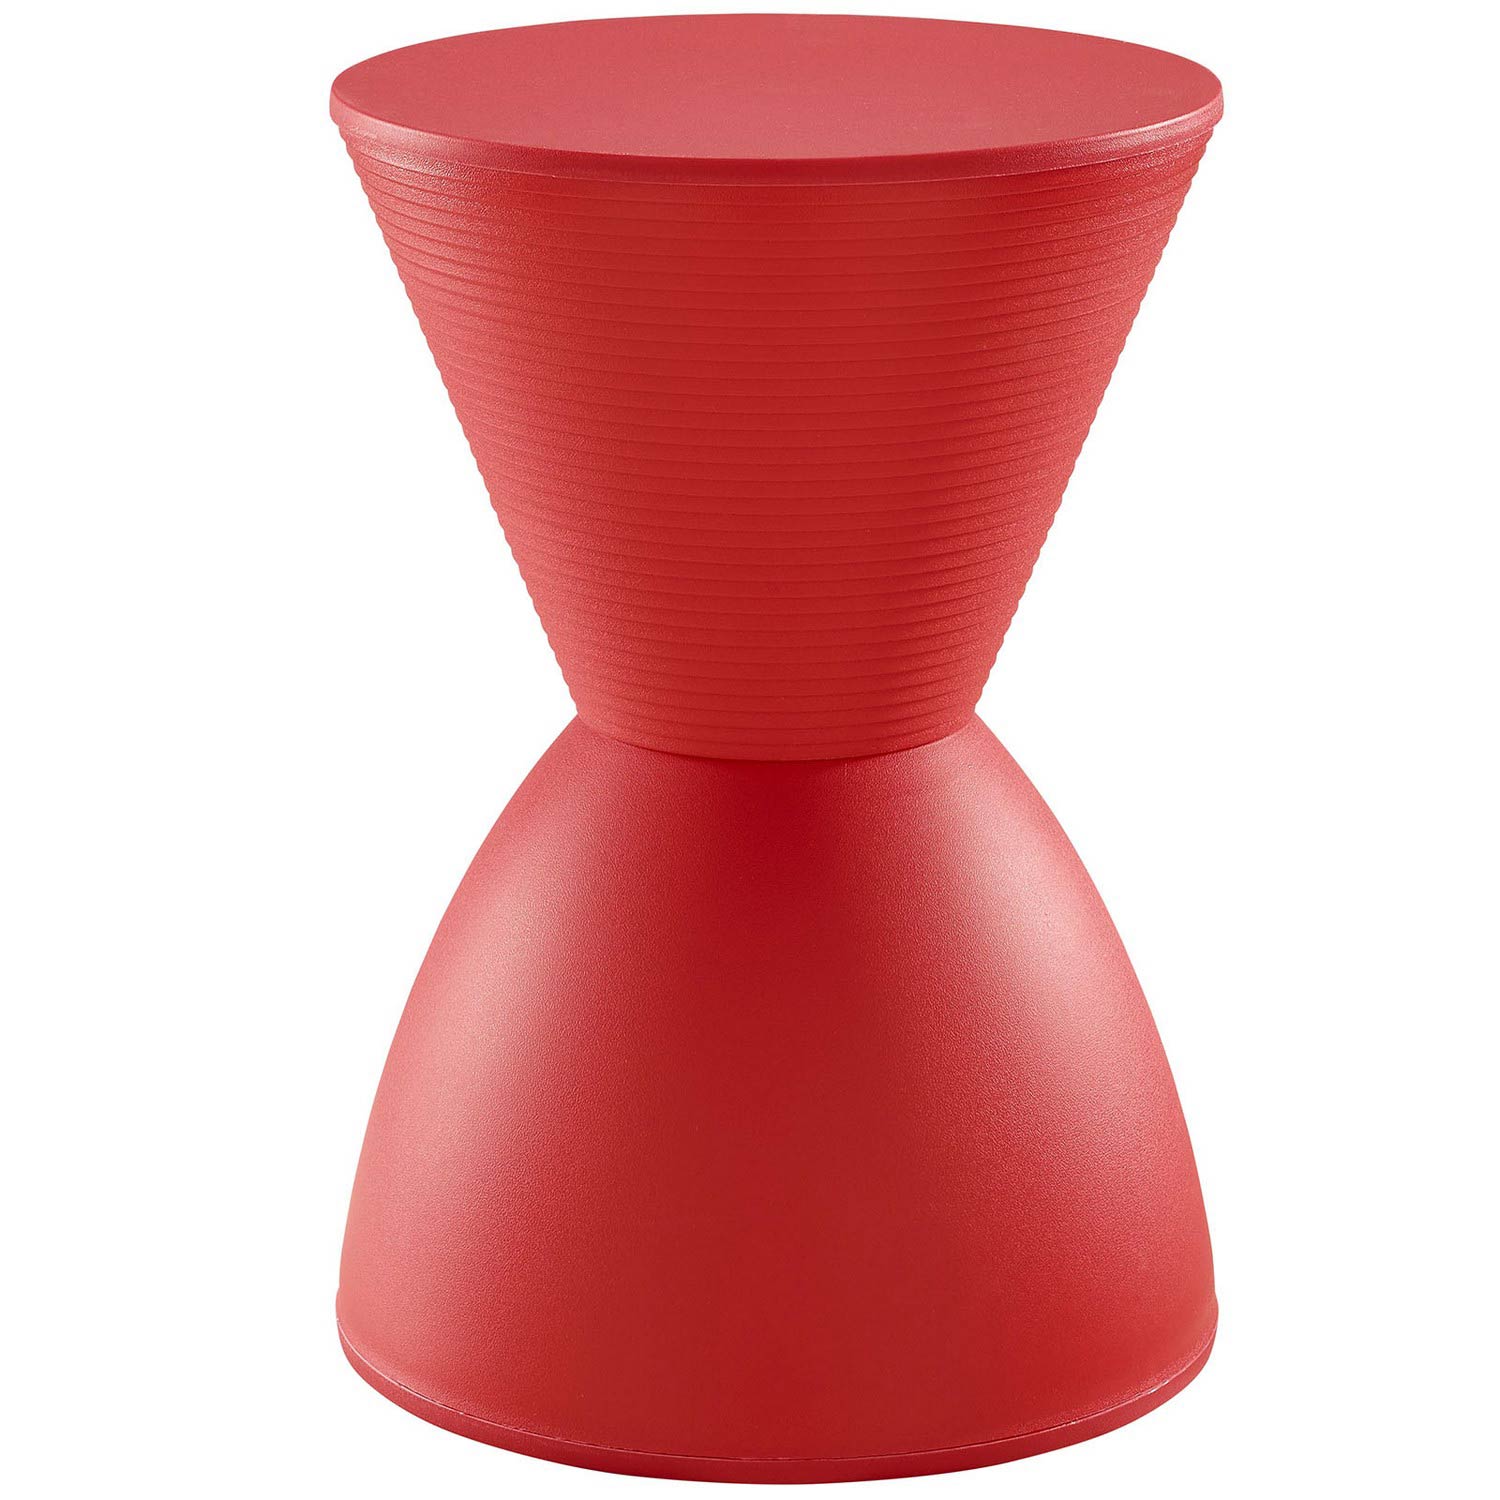 Modway Haste Stool - Red